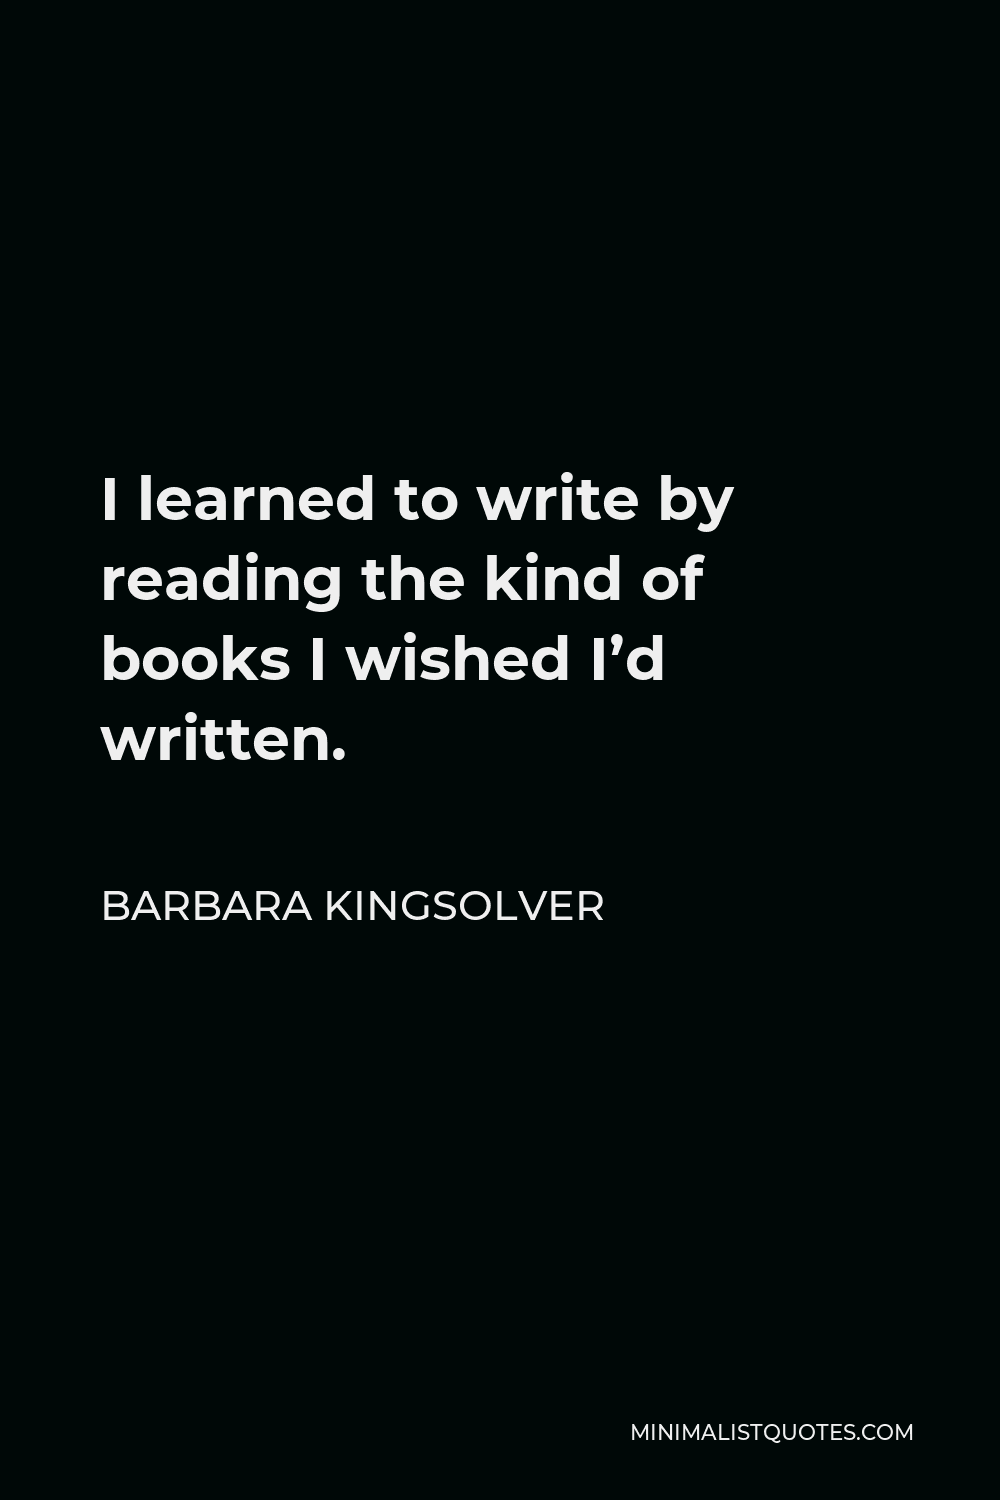 Barbara Kingsolver Quote - I learned to write by reading the kind of books I wished I’d written.